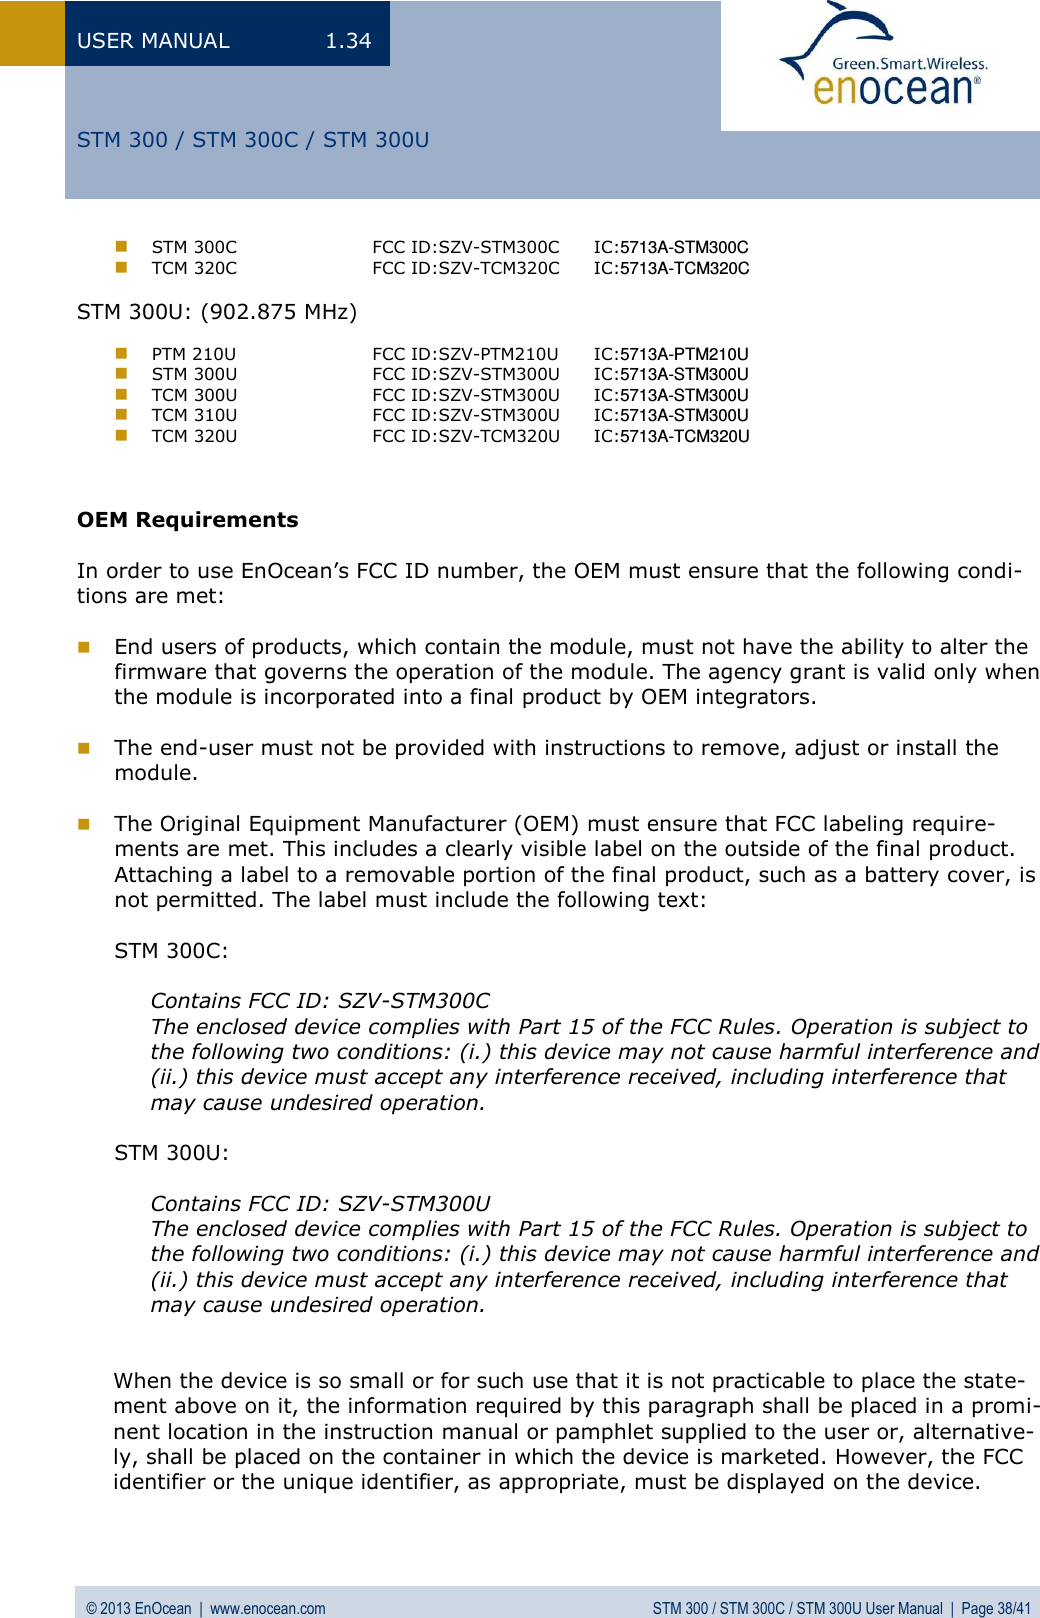 USER MANUAL  1.34 © 2013 EnOcean  |  www.enocean.com  STM 300 / STM 300C / STM 300U User Manual  |  Page 38/41   STM 300 / STM 300C / STM 300U  STM 300C    FCC ID:SZV-STM300C   IC:5713A-STM300C   TCM 320C    FCC ID:SZV-TCM320C   IC:5713A-TCM320C  STM 300U: (902.875 MHz)    PTM 210U    FCC ID:SZV-PTM210U   IC:5713A-PTM210U    STM 300U    FCC ID:SZV-STM300U   IC:5713A-STM300U  TCM 300U    FCC ID:SZV-STM300U   IC:5713A-STM300U  TCM 310U    FCC ID:SZV-STM300U   IC:5713A-STM300U  TCM 320U    FCC ID:SZV-TCM320U   IC:5713A-TCM320U    OEM Requirements  In order to use EnOcean’s FCC ID number, the OEM must ensure that the following condi-tions are met:   End users of products, which contain the module, must not have the ability to alter the firmware that governs the operation of the module. The agency grant is valid only when the module is incorporated into a final product by OEM integrators.   The end-user must not be provided with instructions to remove, adjust or install the module.   The Original Equipment Manufacturer (OEM) must ensure that FCC labeling require-ments are met. This includes a clearly visible label on the outside of the final product. Attaching a label to a removable portion of the final product, such as a battery cover, is not permitted. The label must include the following text:  STM 300C:  Contains FCC ID: SZV-STM300C   The enclosed device complies with Part 15 of the FCC Rules. Operation is subject to the following two conditions: (i.) this device may not cause harmful interference and (ii.) this device must accept any interference received, including interference that may cause undesired operation.  STM 300U:  Contains FCC ID: SZV-STM300U   The enclosed device complies with Part 15 of the FCC Rules. Operation is subject to the following two conditions: (i.) this device may not cause harmful interference and (ii.) this device must accept any interference received, including interference that may cause undesired operation.   When the device is so small or for such use that it is not practicable to place the state-ment above on it, the information required by this paragraph shall be placed in a promi-nent location in the instruction manual or pamphlet supplied to the user or, alternative-ly, shall be placed on the container in which the device is marketed. However, the FCC identifier or the unique identifier, as appropriate, must be displayed on the device.  